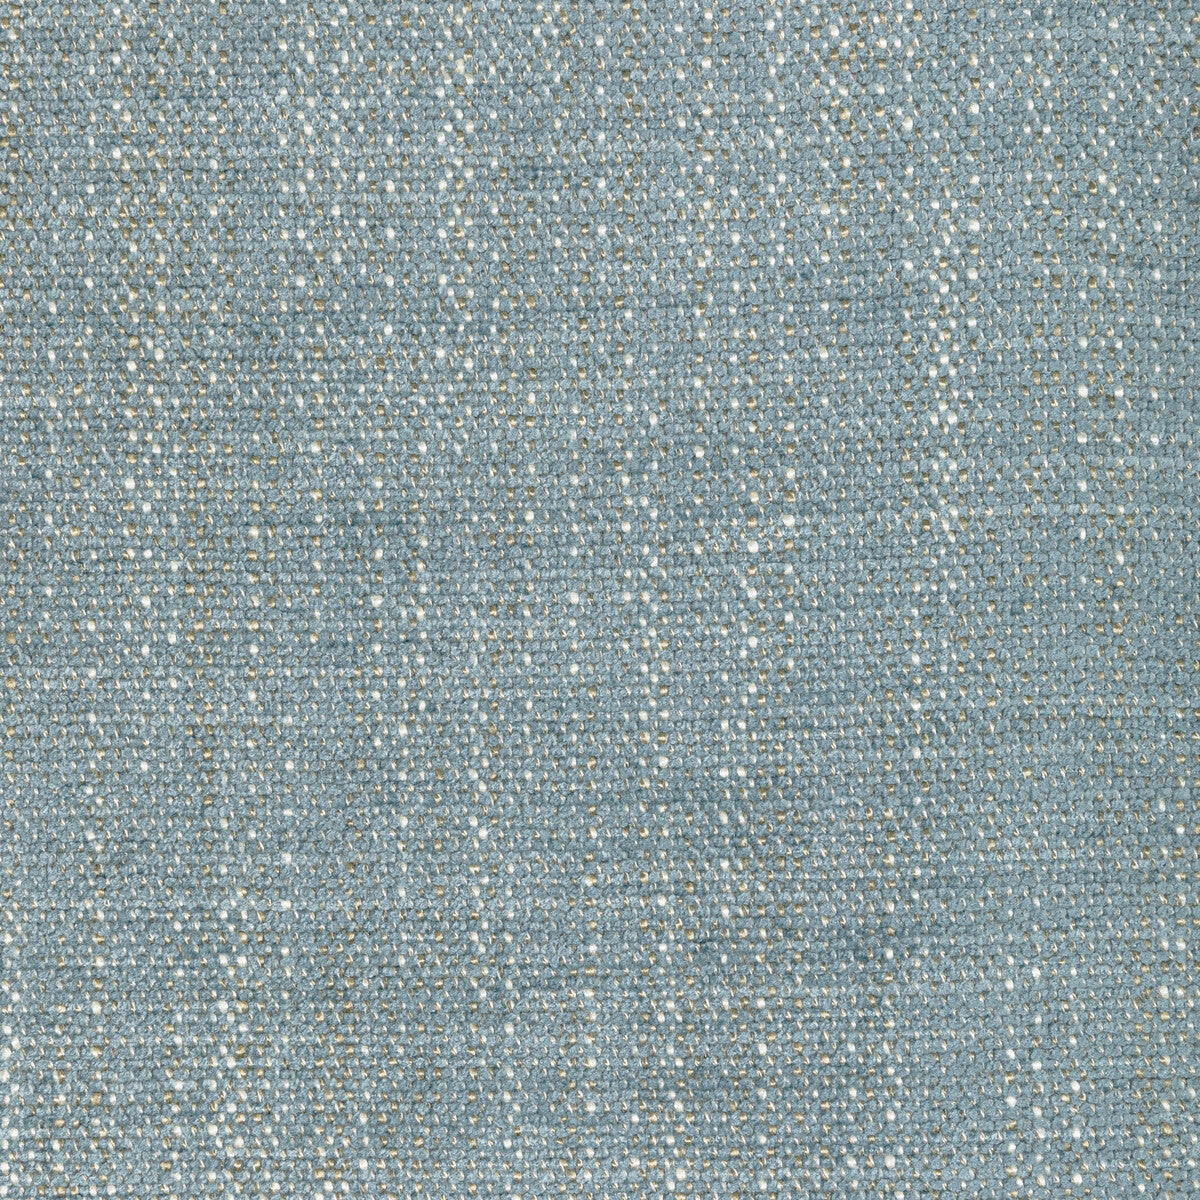 Kravet Design fabric in 36408-516 color - pattern 36408.516.0 - by Kravet Design in the Performance Crypton Home collection